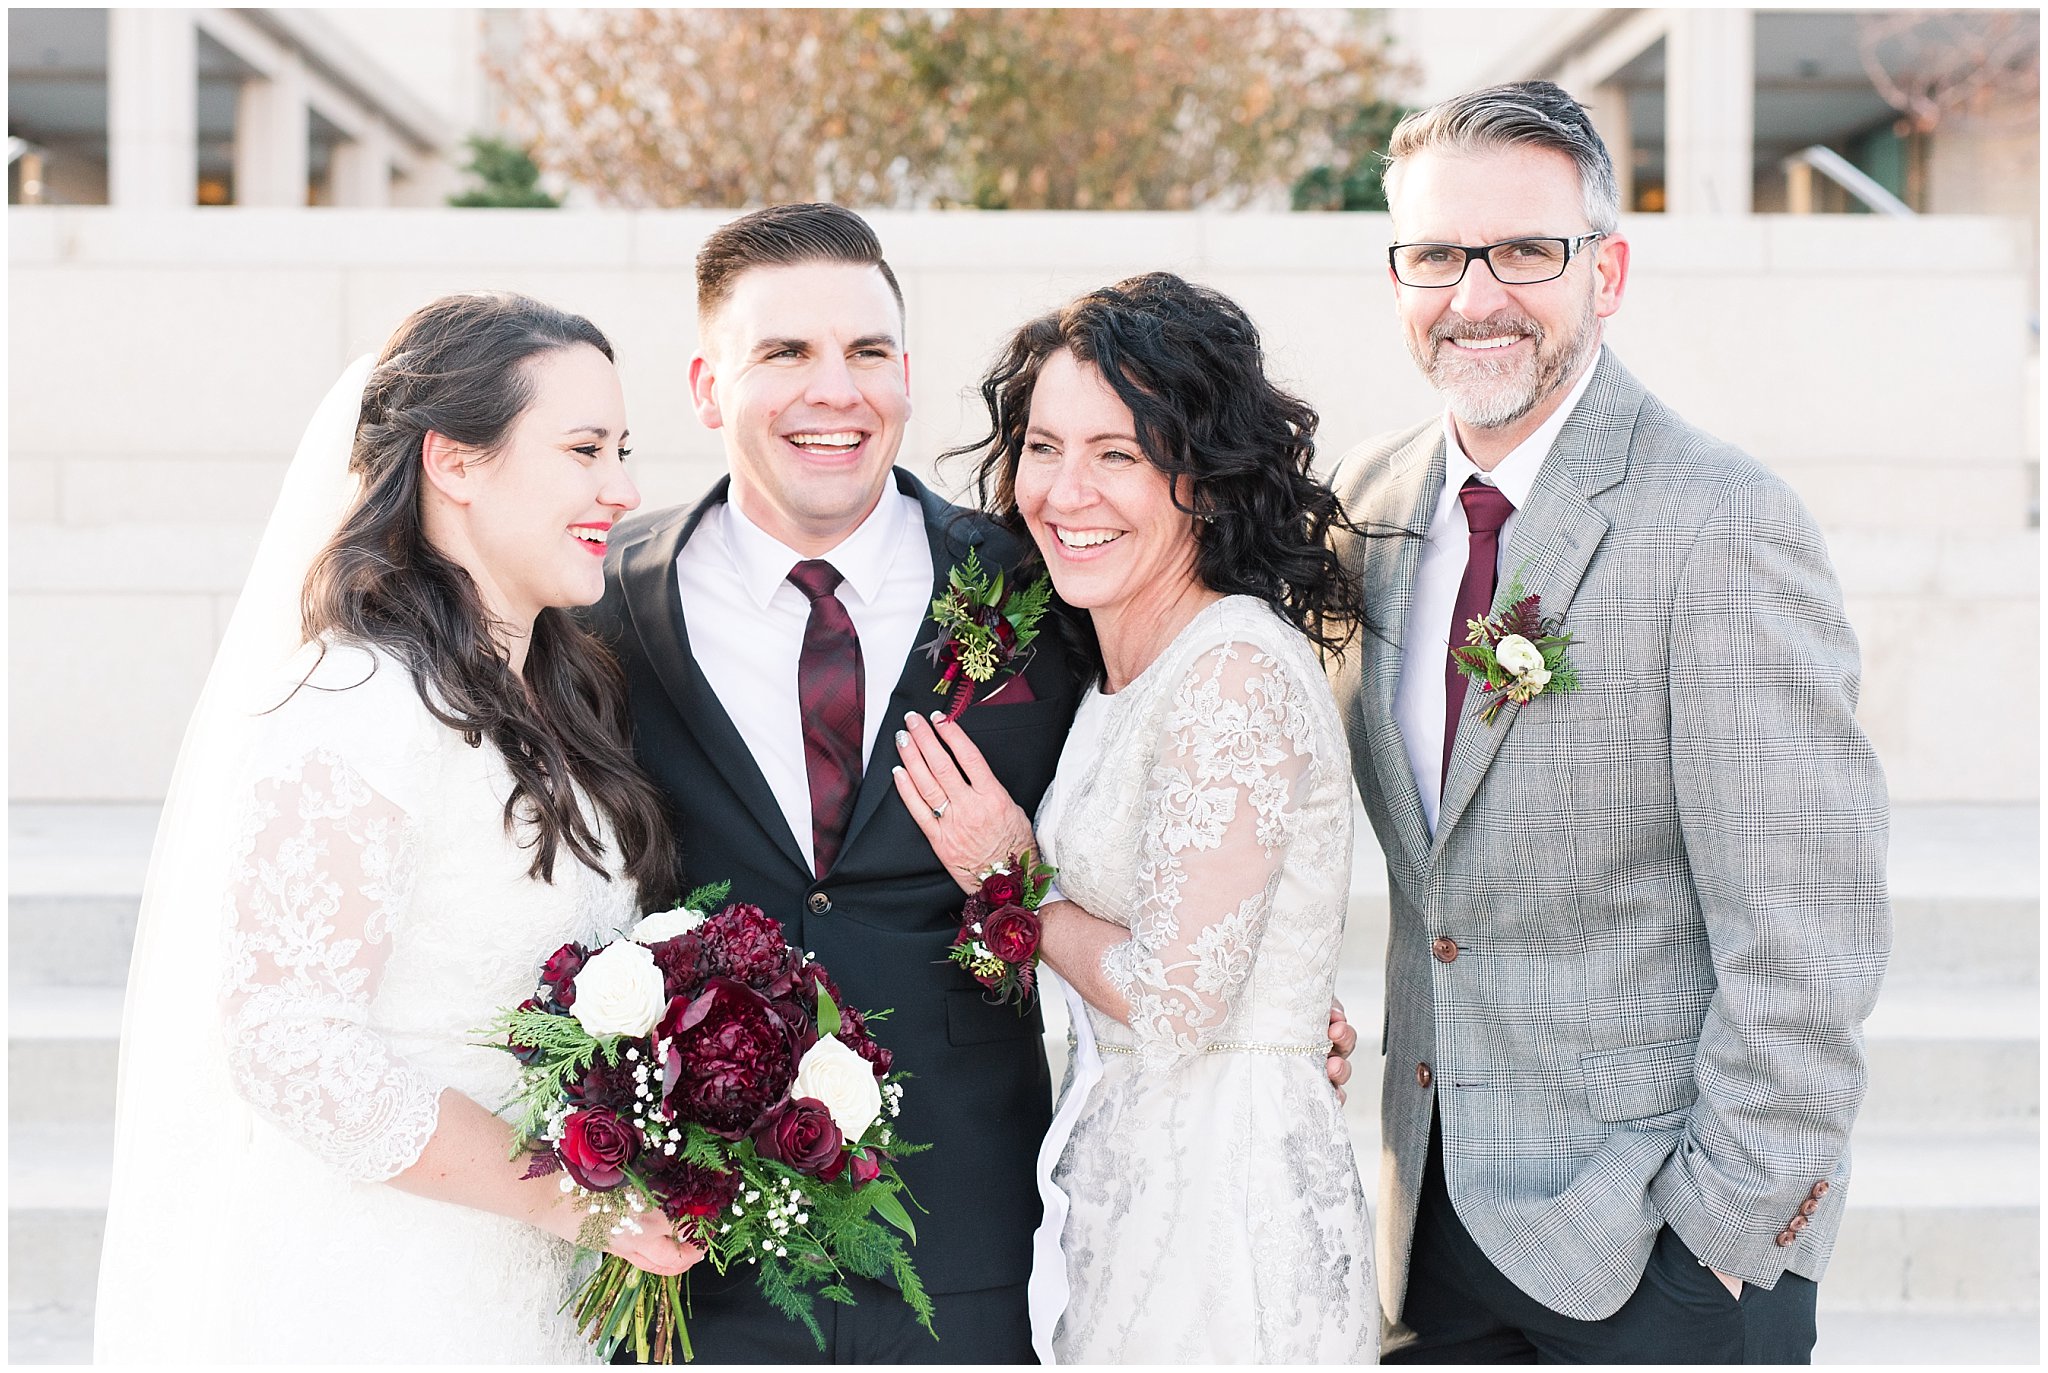 Wedding day family portraits at the Oquirrh Mountain Temple | Oquirrh Mountain Temple and Gardner Village Wedding | The Gathering Place | Jessie and Dallin Photography